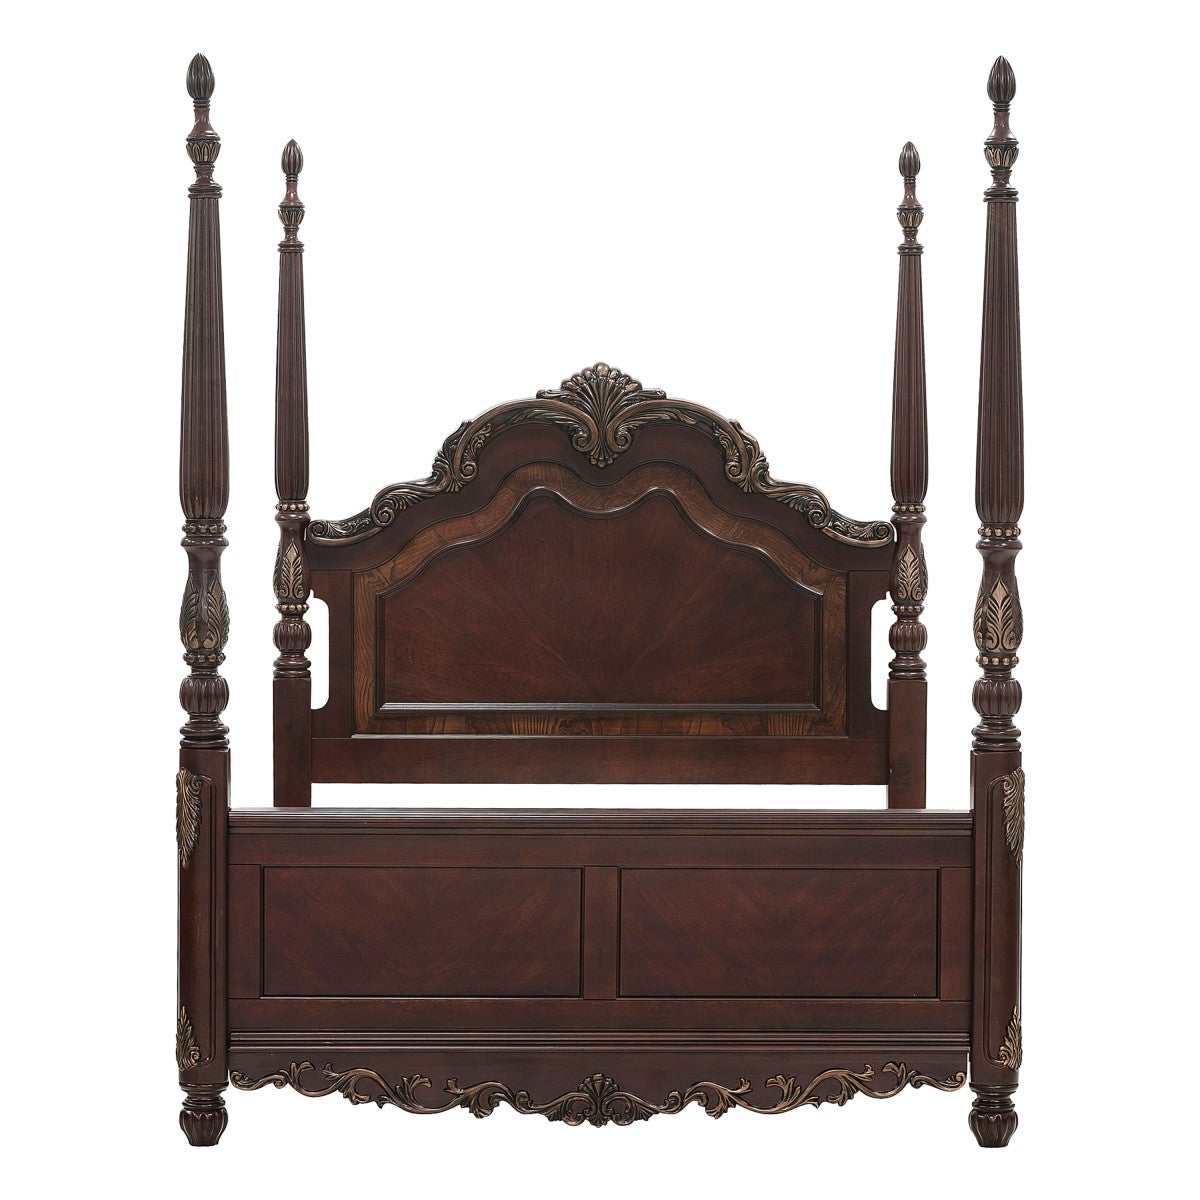 Deryn Park Cherry Traditional Cherry And Walnut Veneer Wood And Engineered Wood King Poster Bed